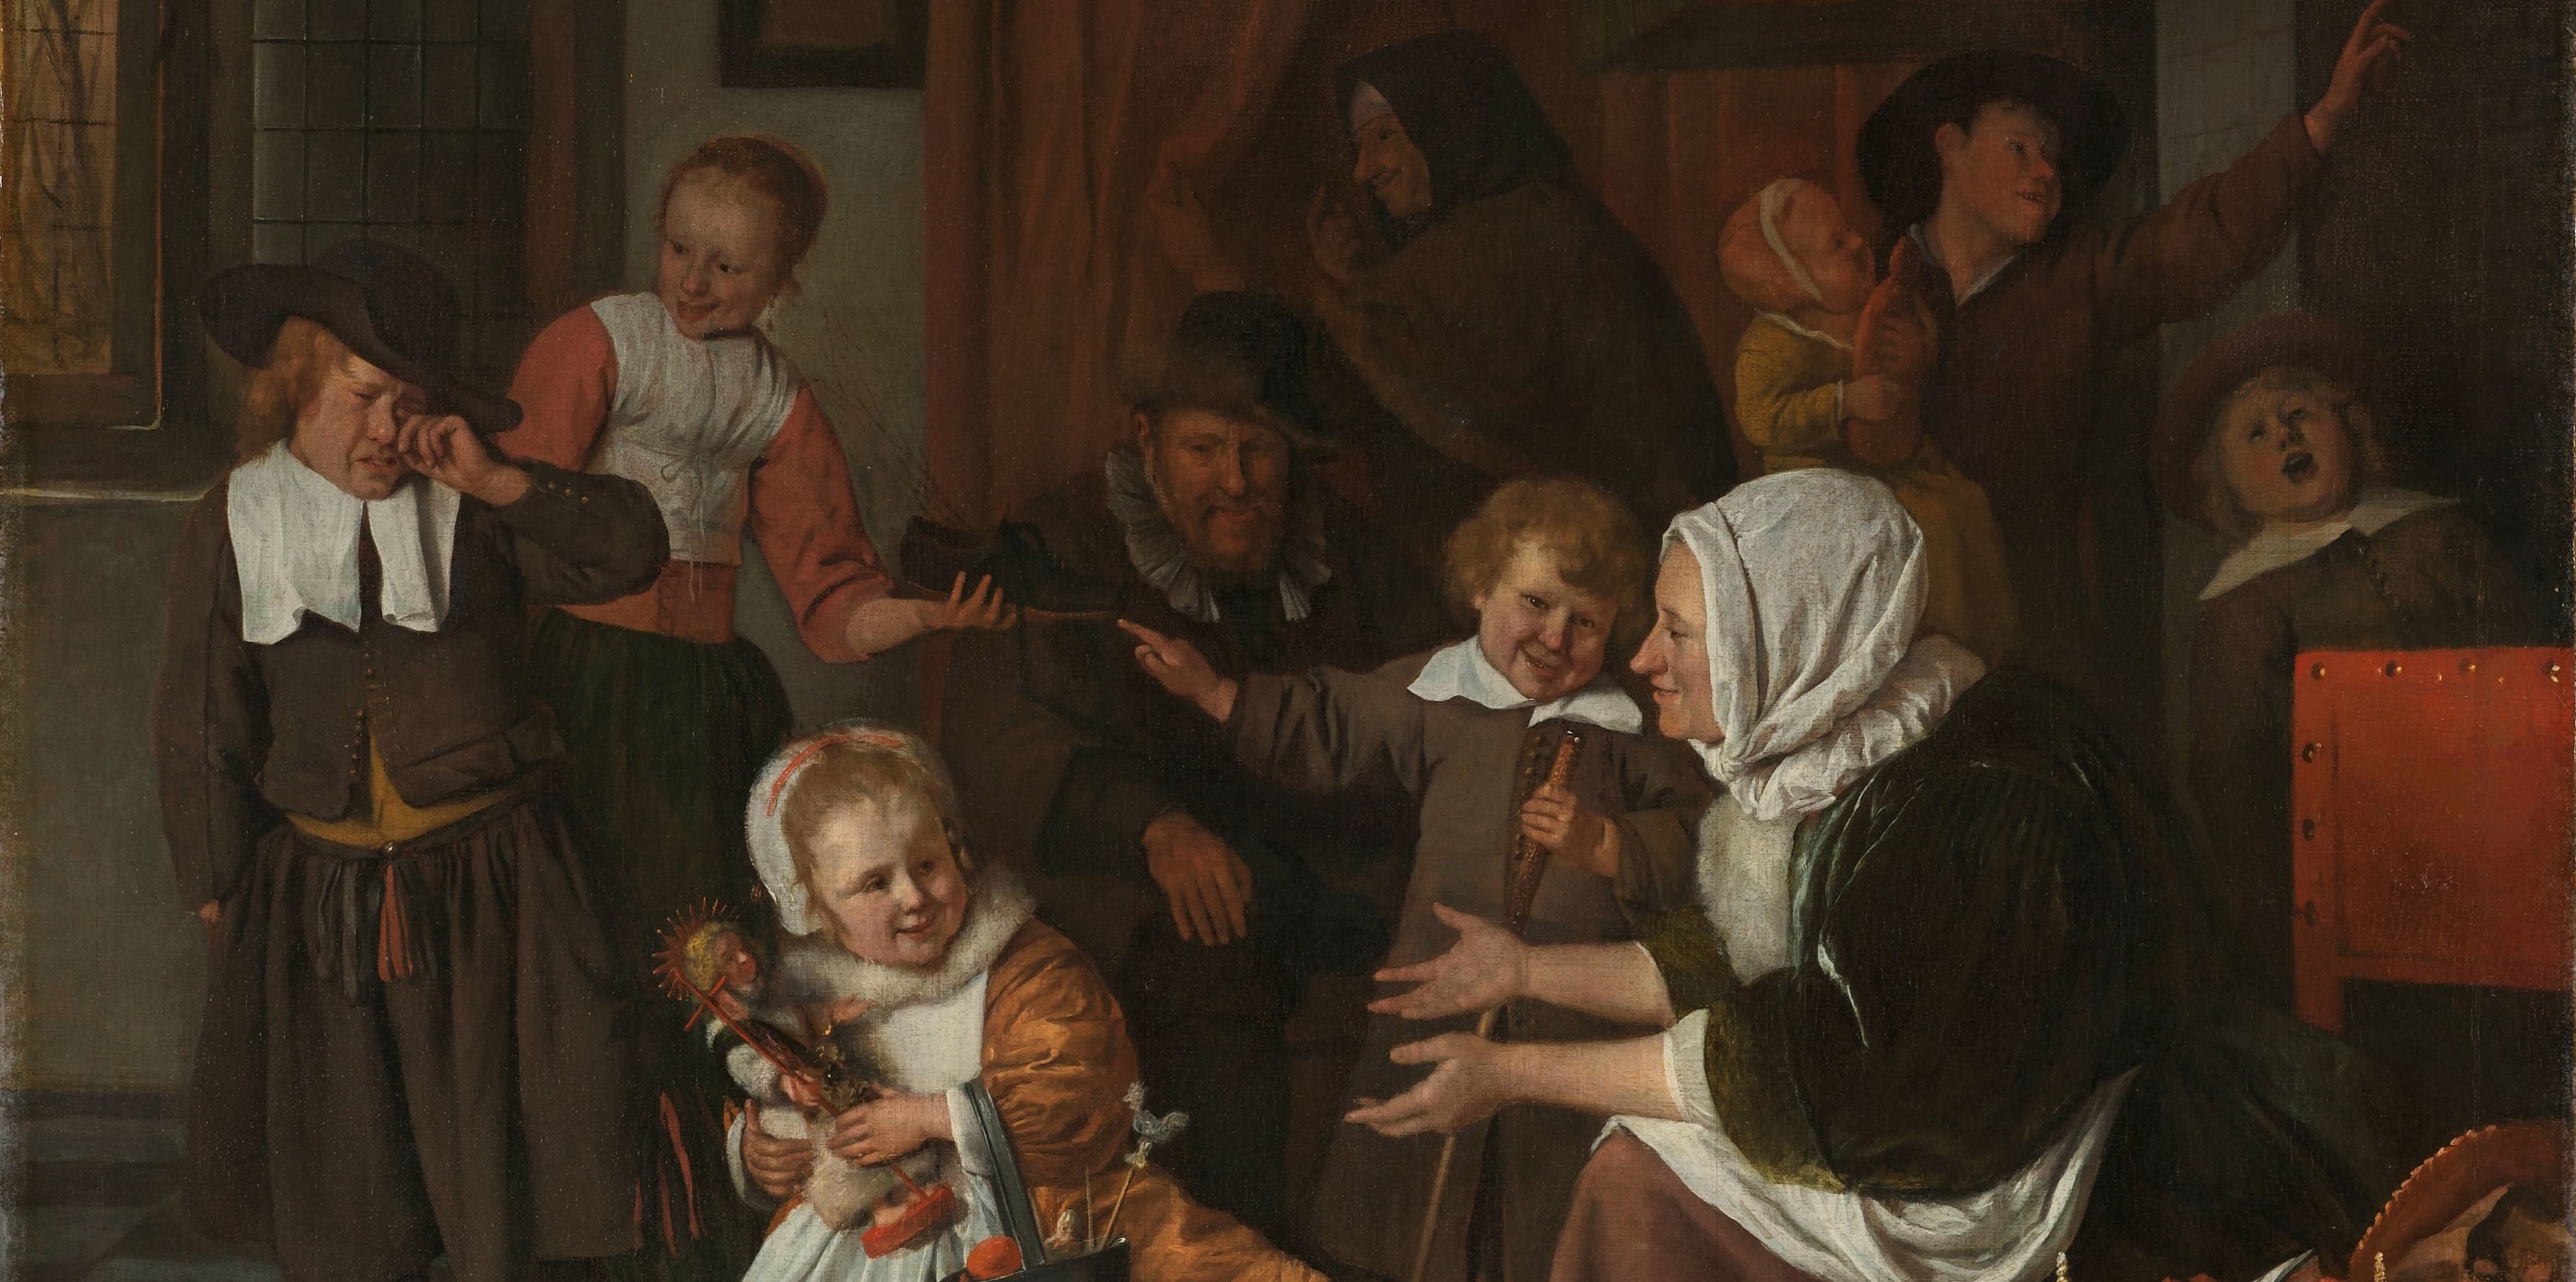 The Feast of St. Nicholas&quot; painting that shows children from the 17th century receiving gifts from Sinterklaas.